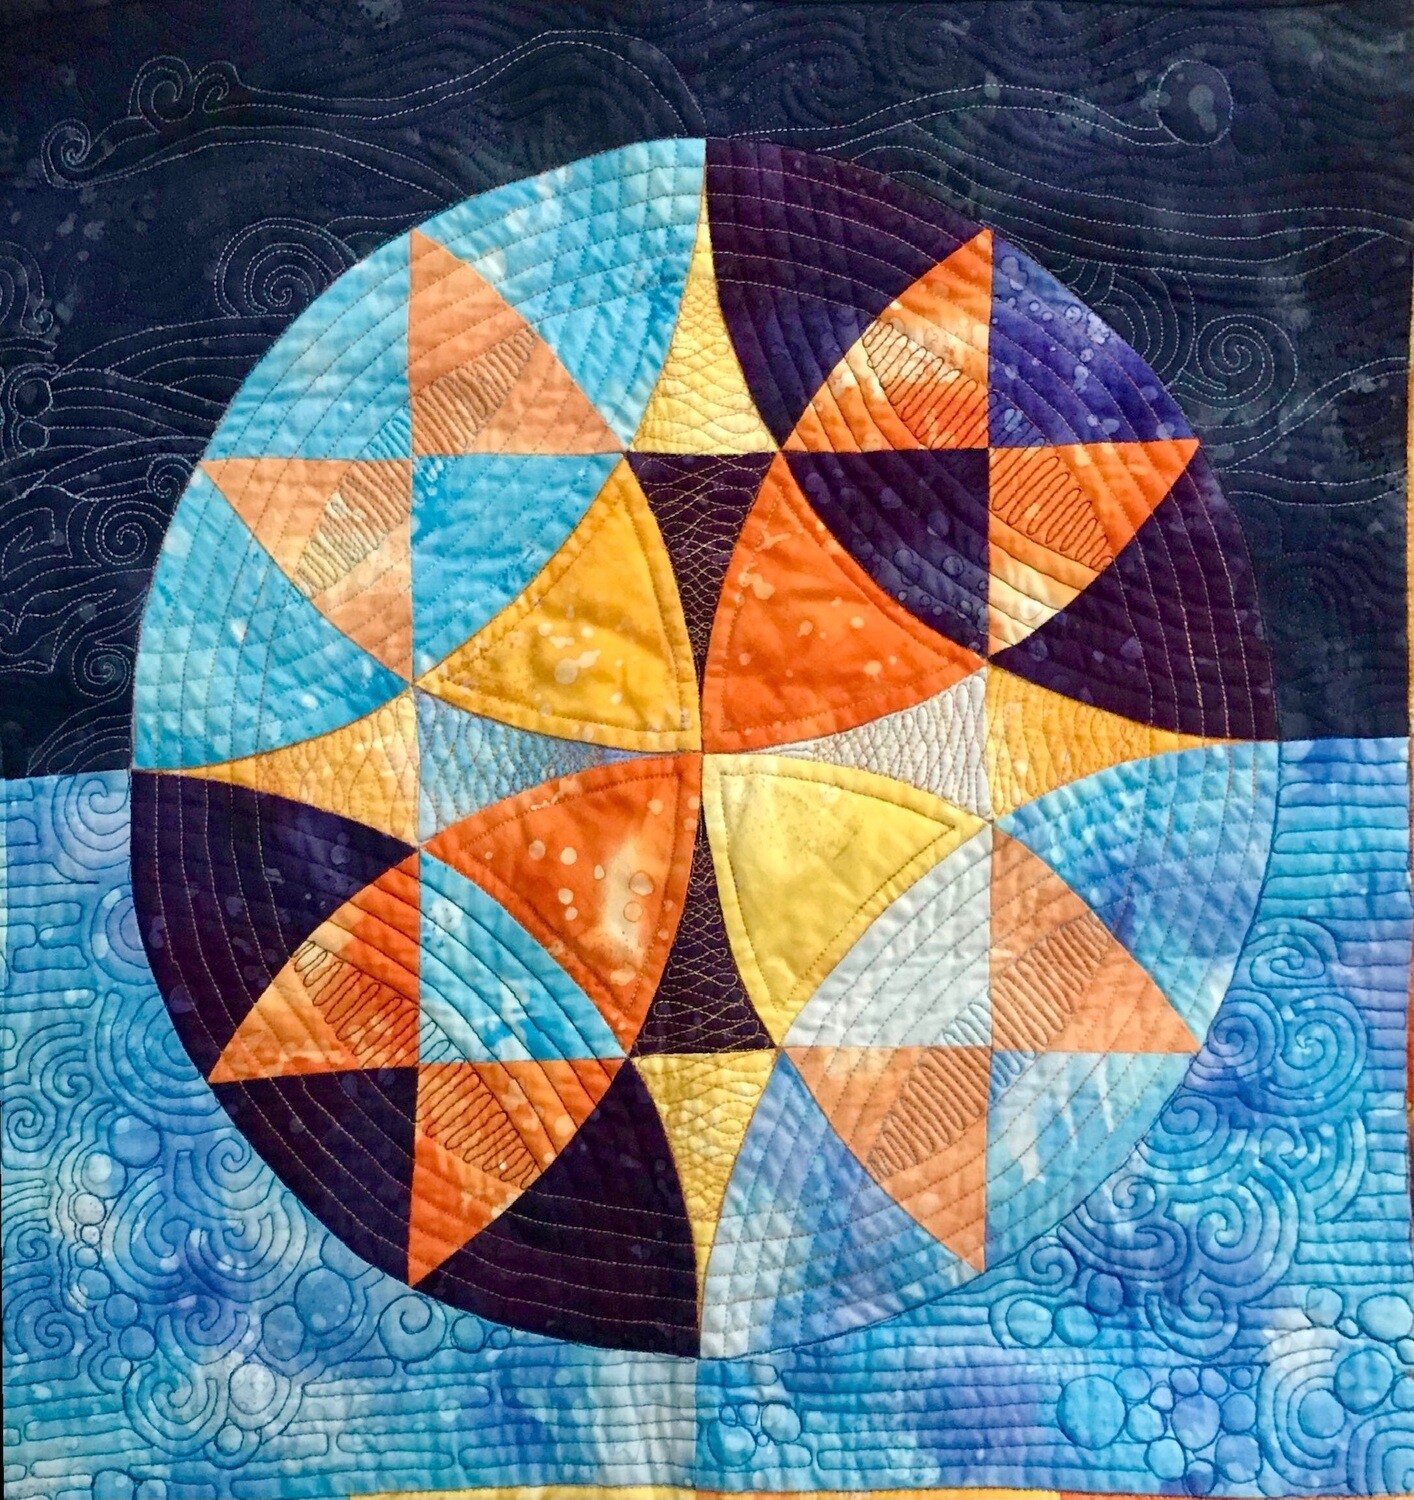 Downloadable Pattern and Instructions for the WINDING WAYS WHEEL Quilt Block